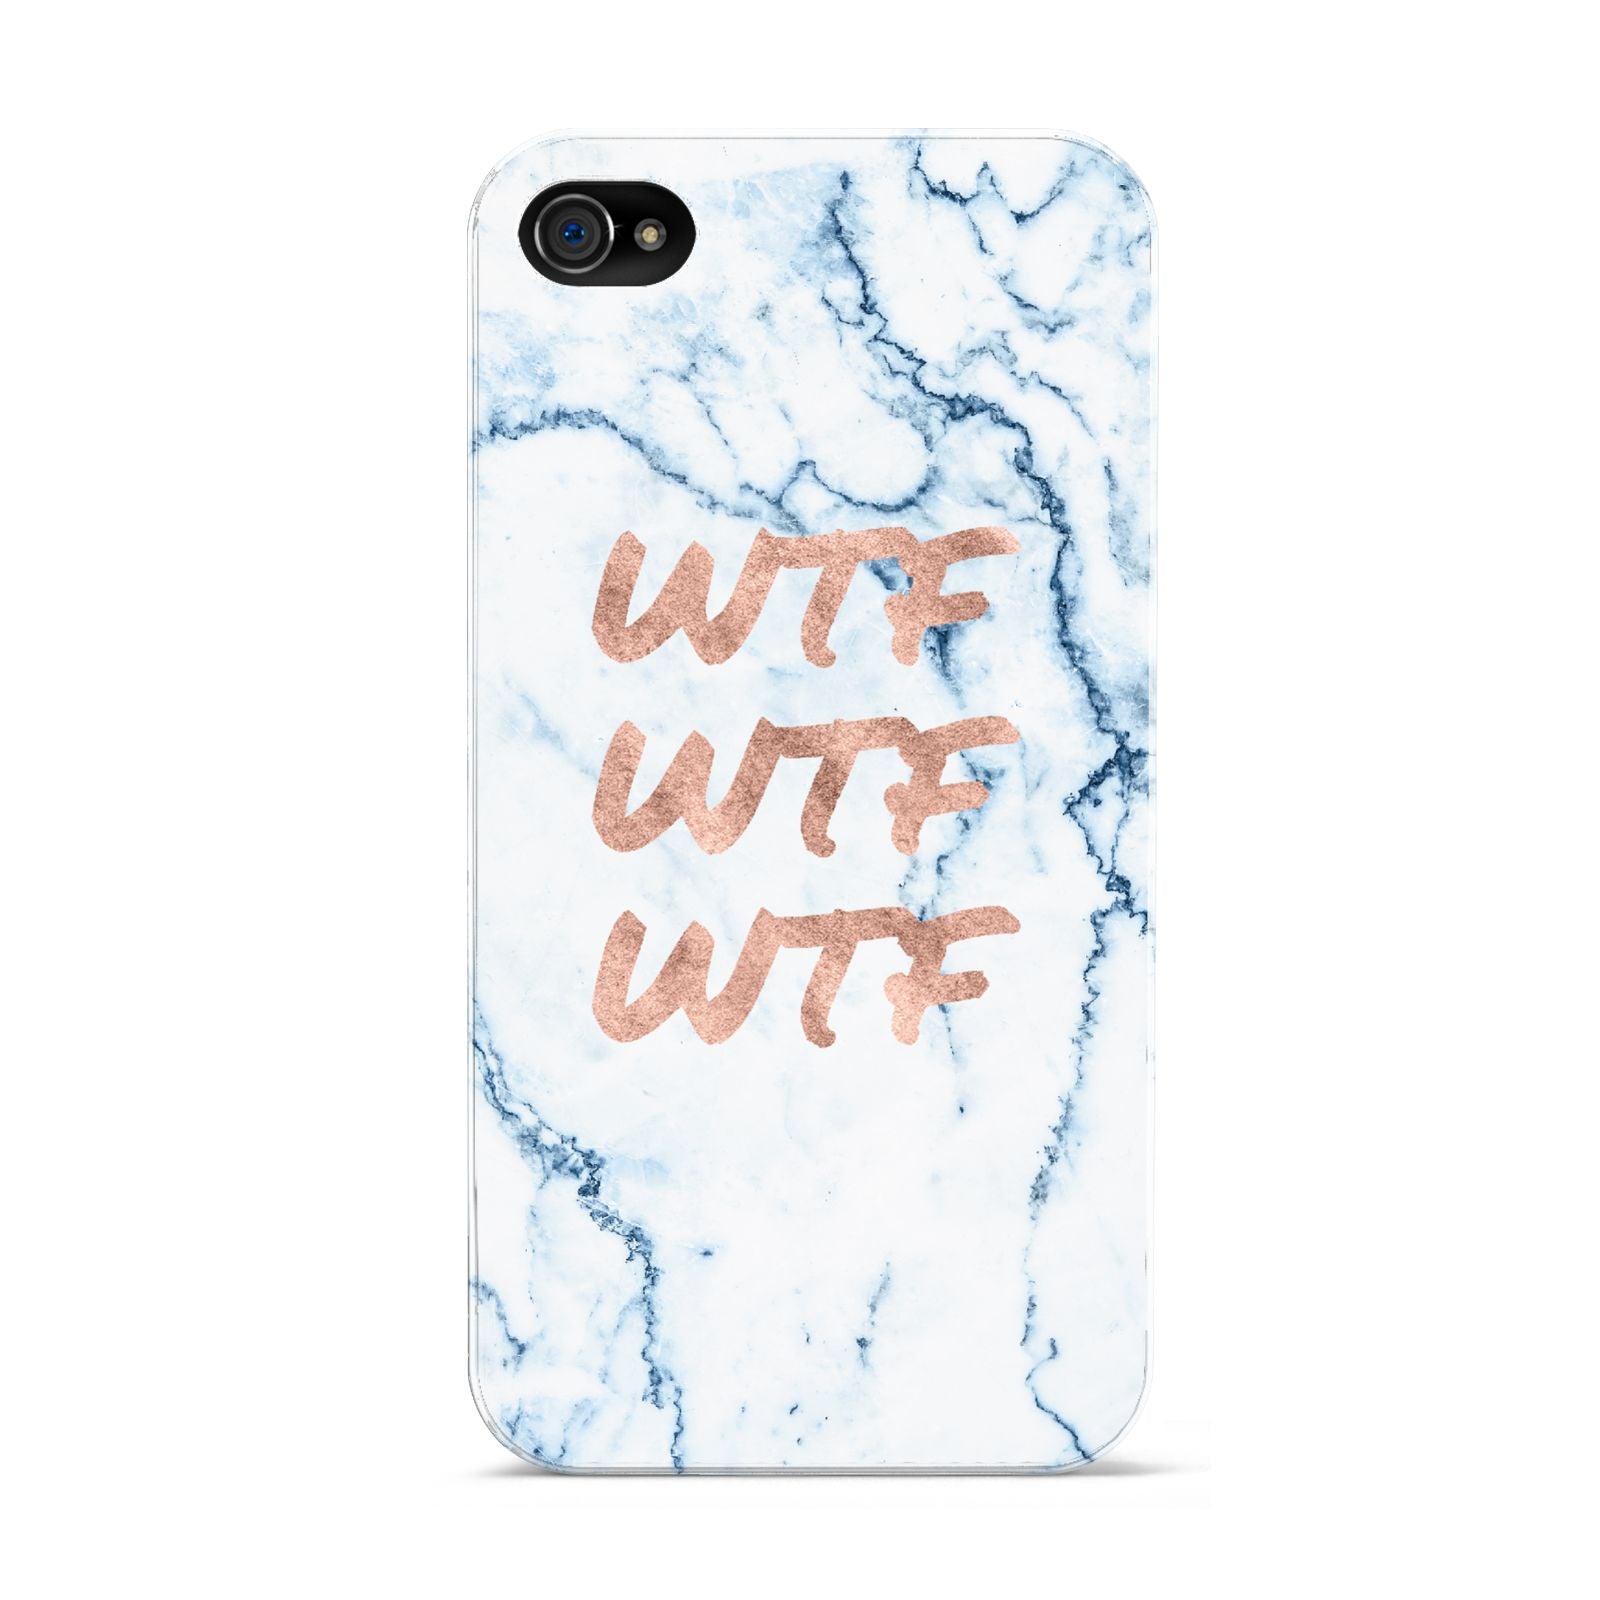 Wtf Rose Gold Blue Marble Effect Apple iPhone 4s Case